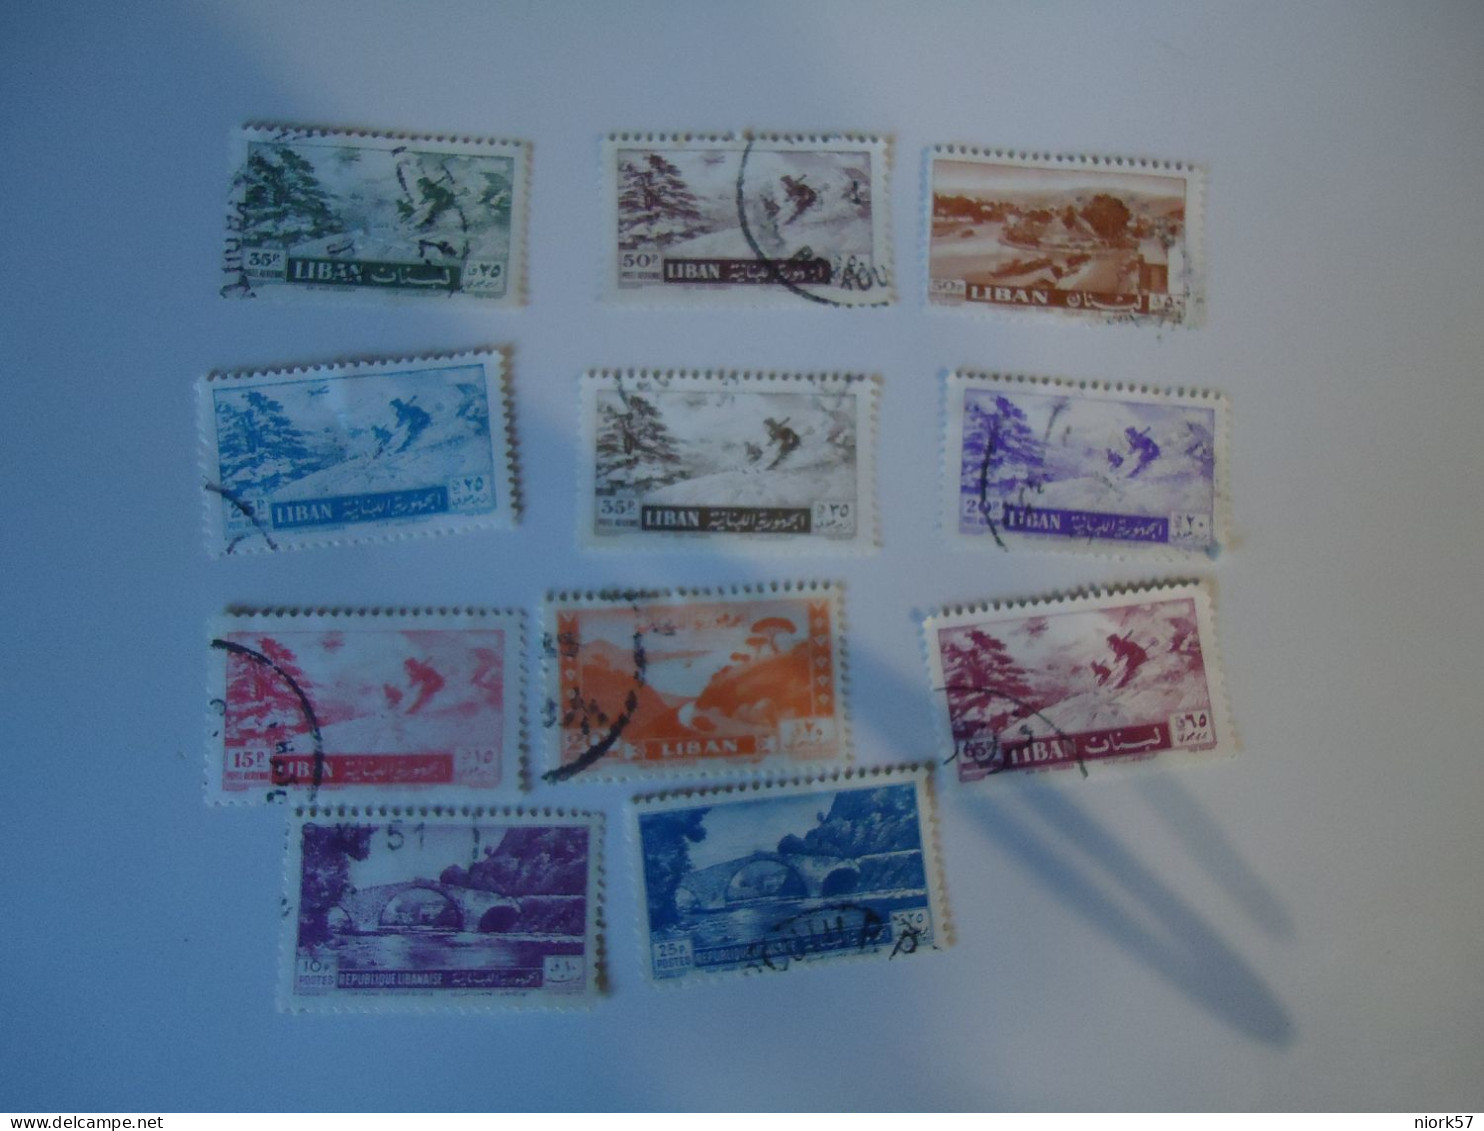 LIBAN  LEBANON USED    11  STAMPS  LANDSCAPES MOMUMENTS SPORTS SKIERS - Lebanon